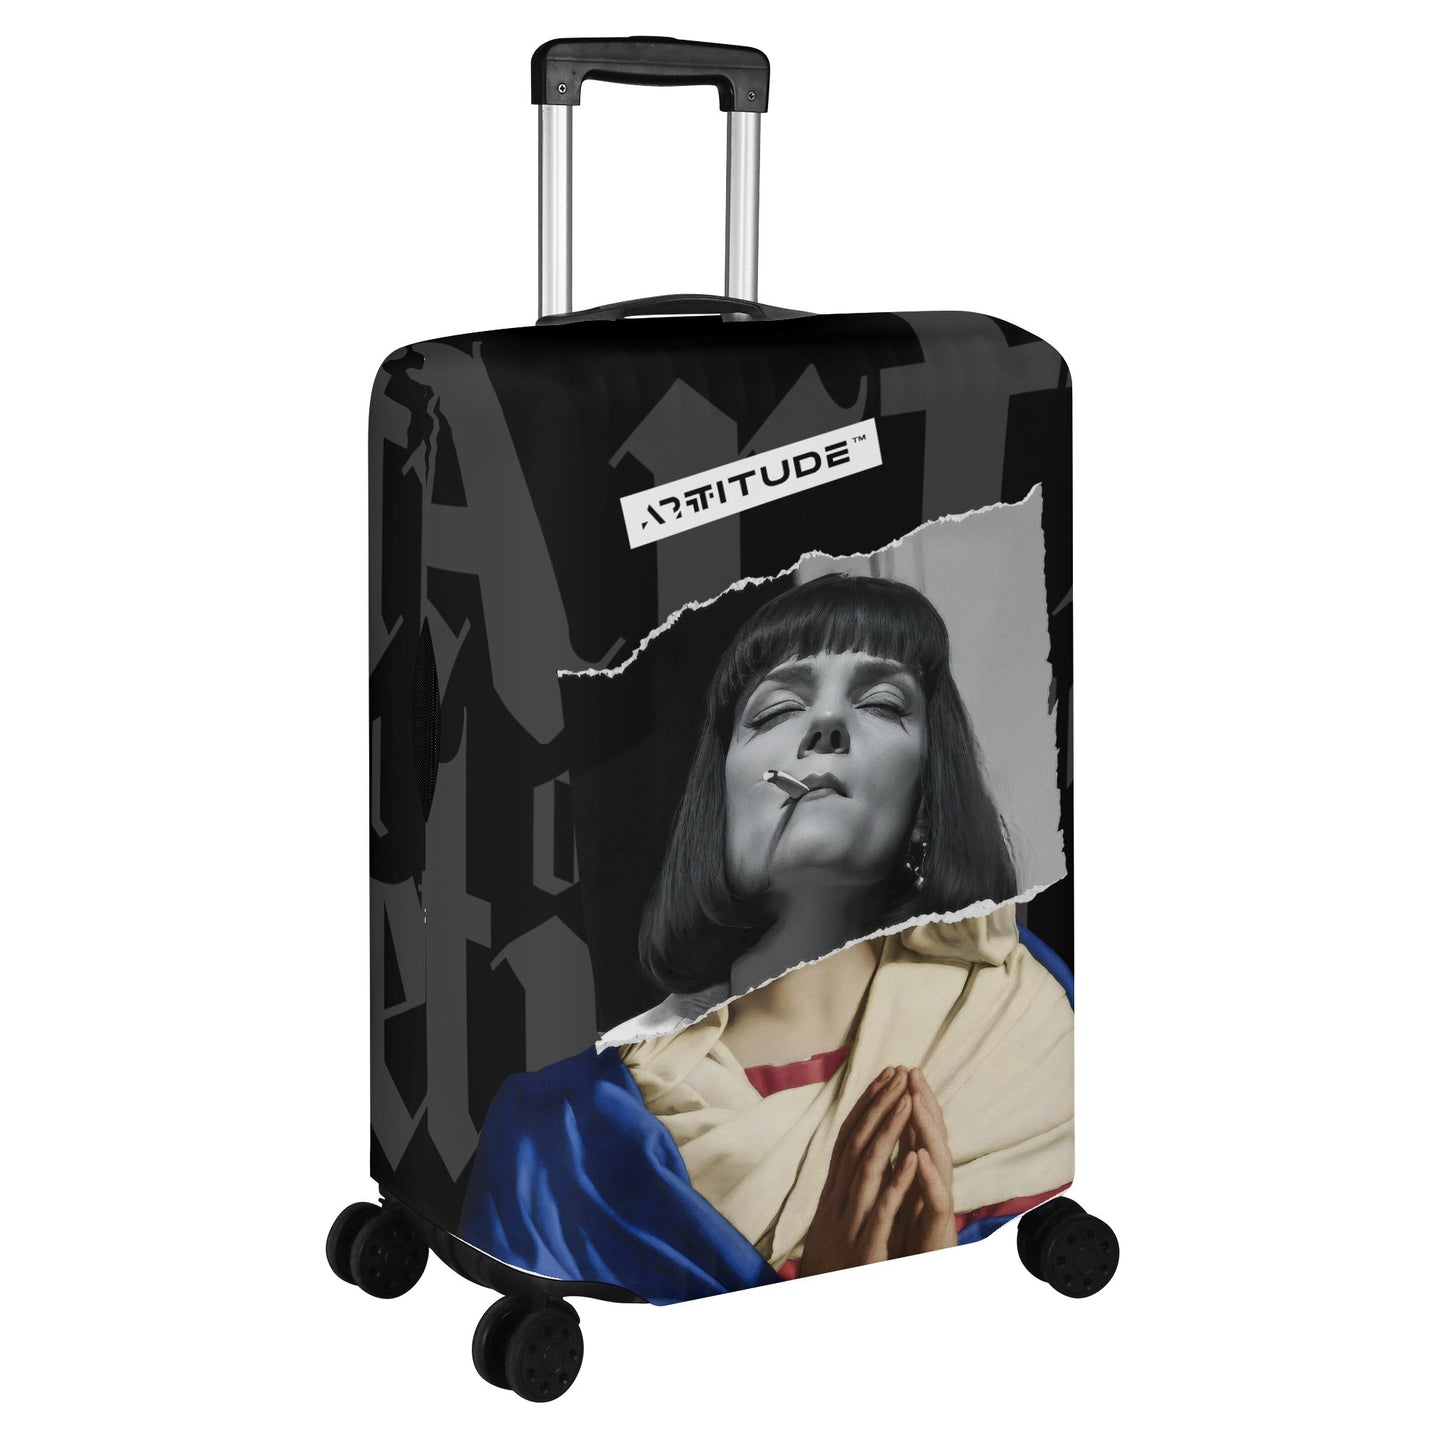 Virgin in a Prayer Luggage Cover